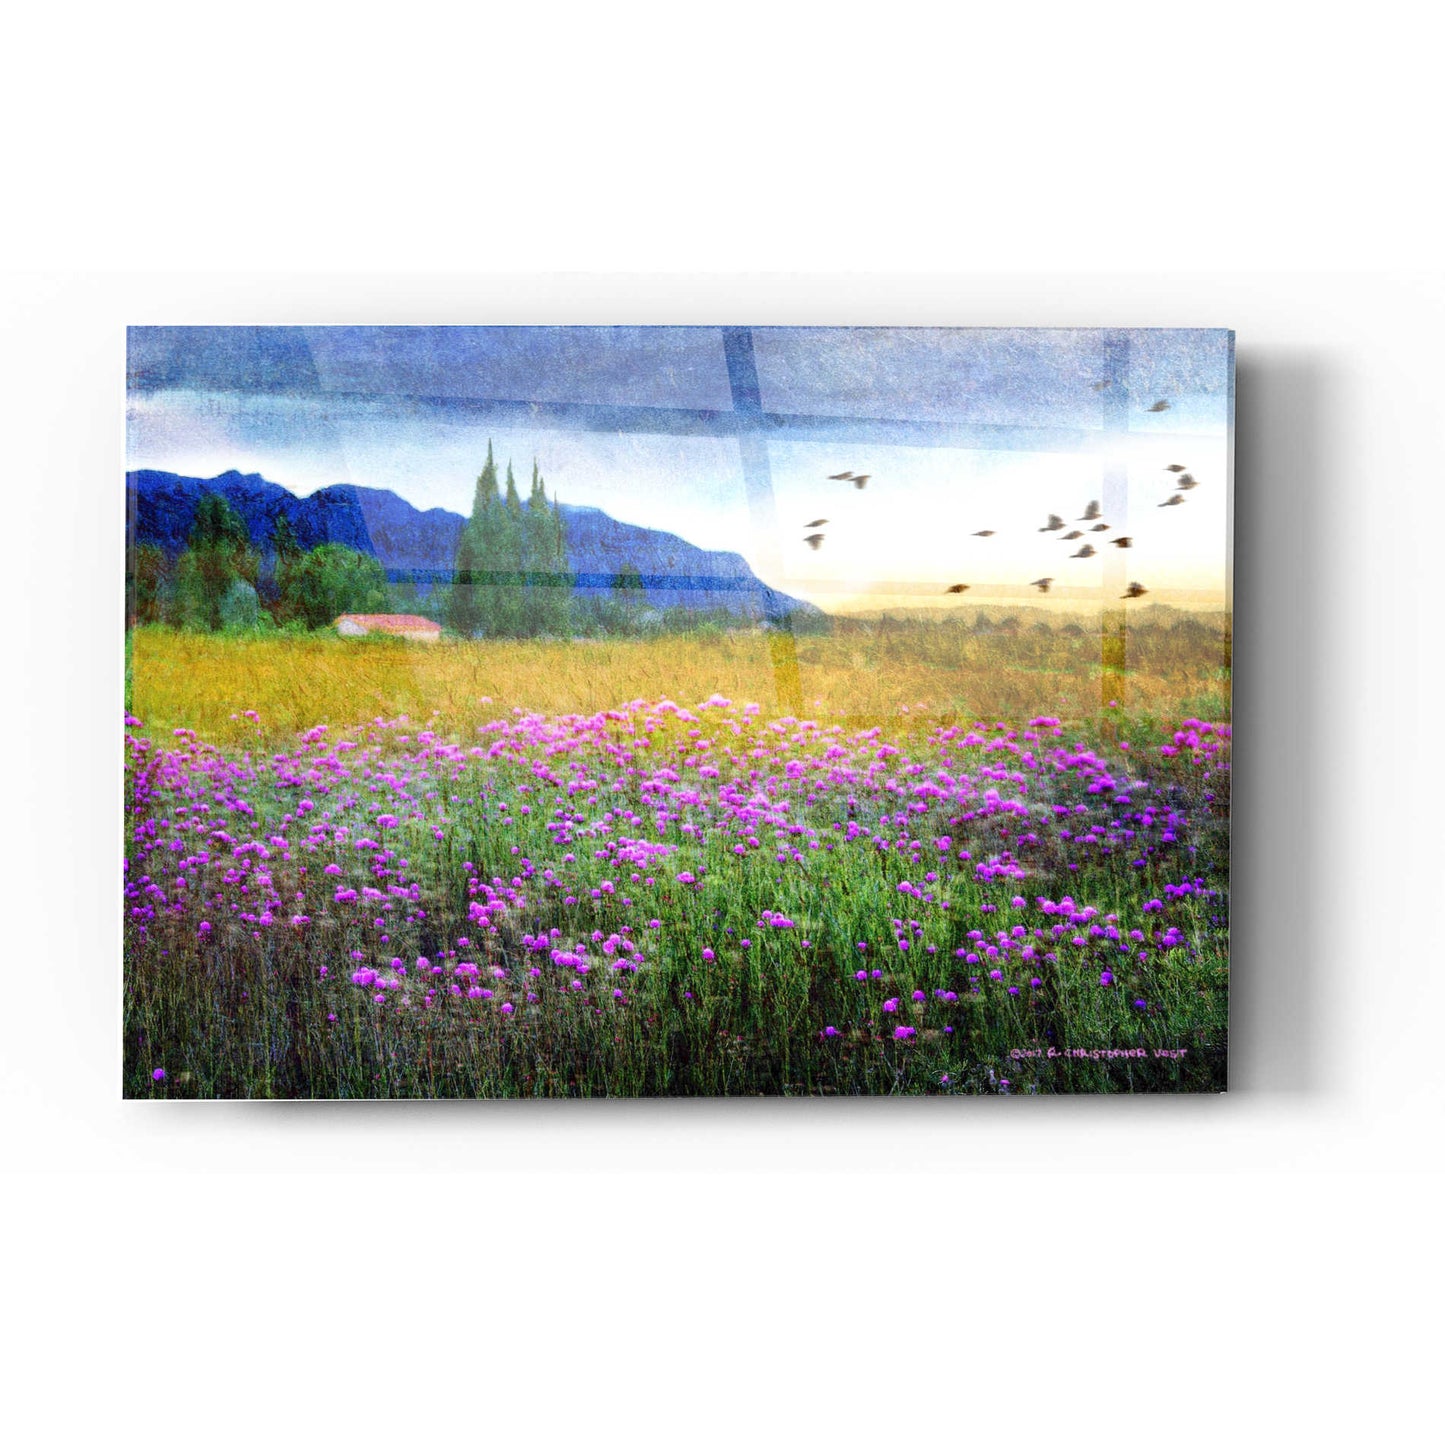 Epic Art 'Mesa Verde and Knapweed' by Chris Vest, Acrylic Glass Wall Art,12x16